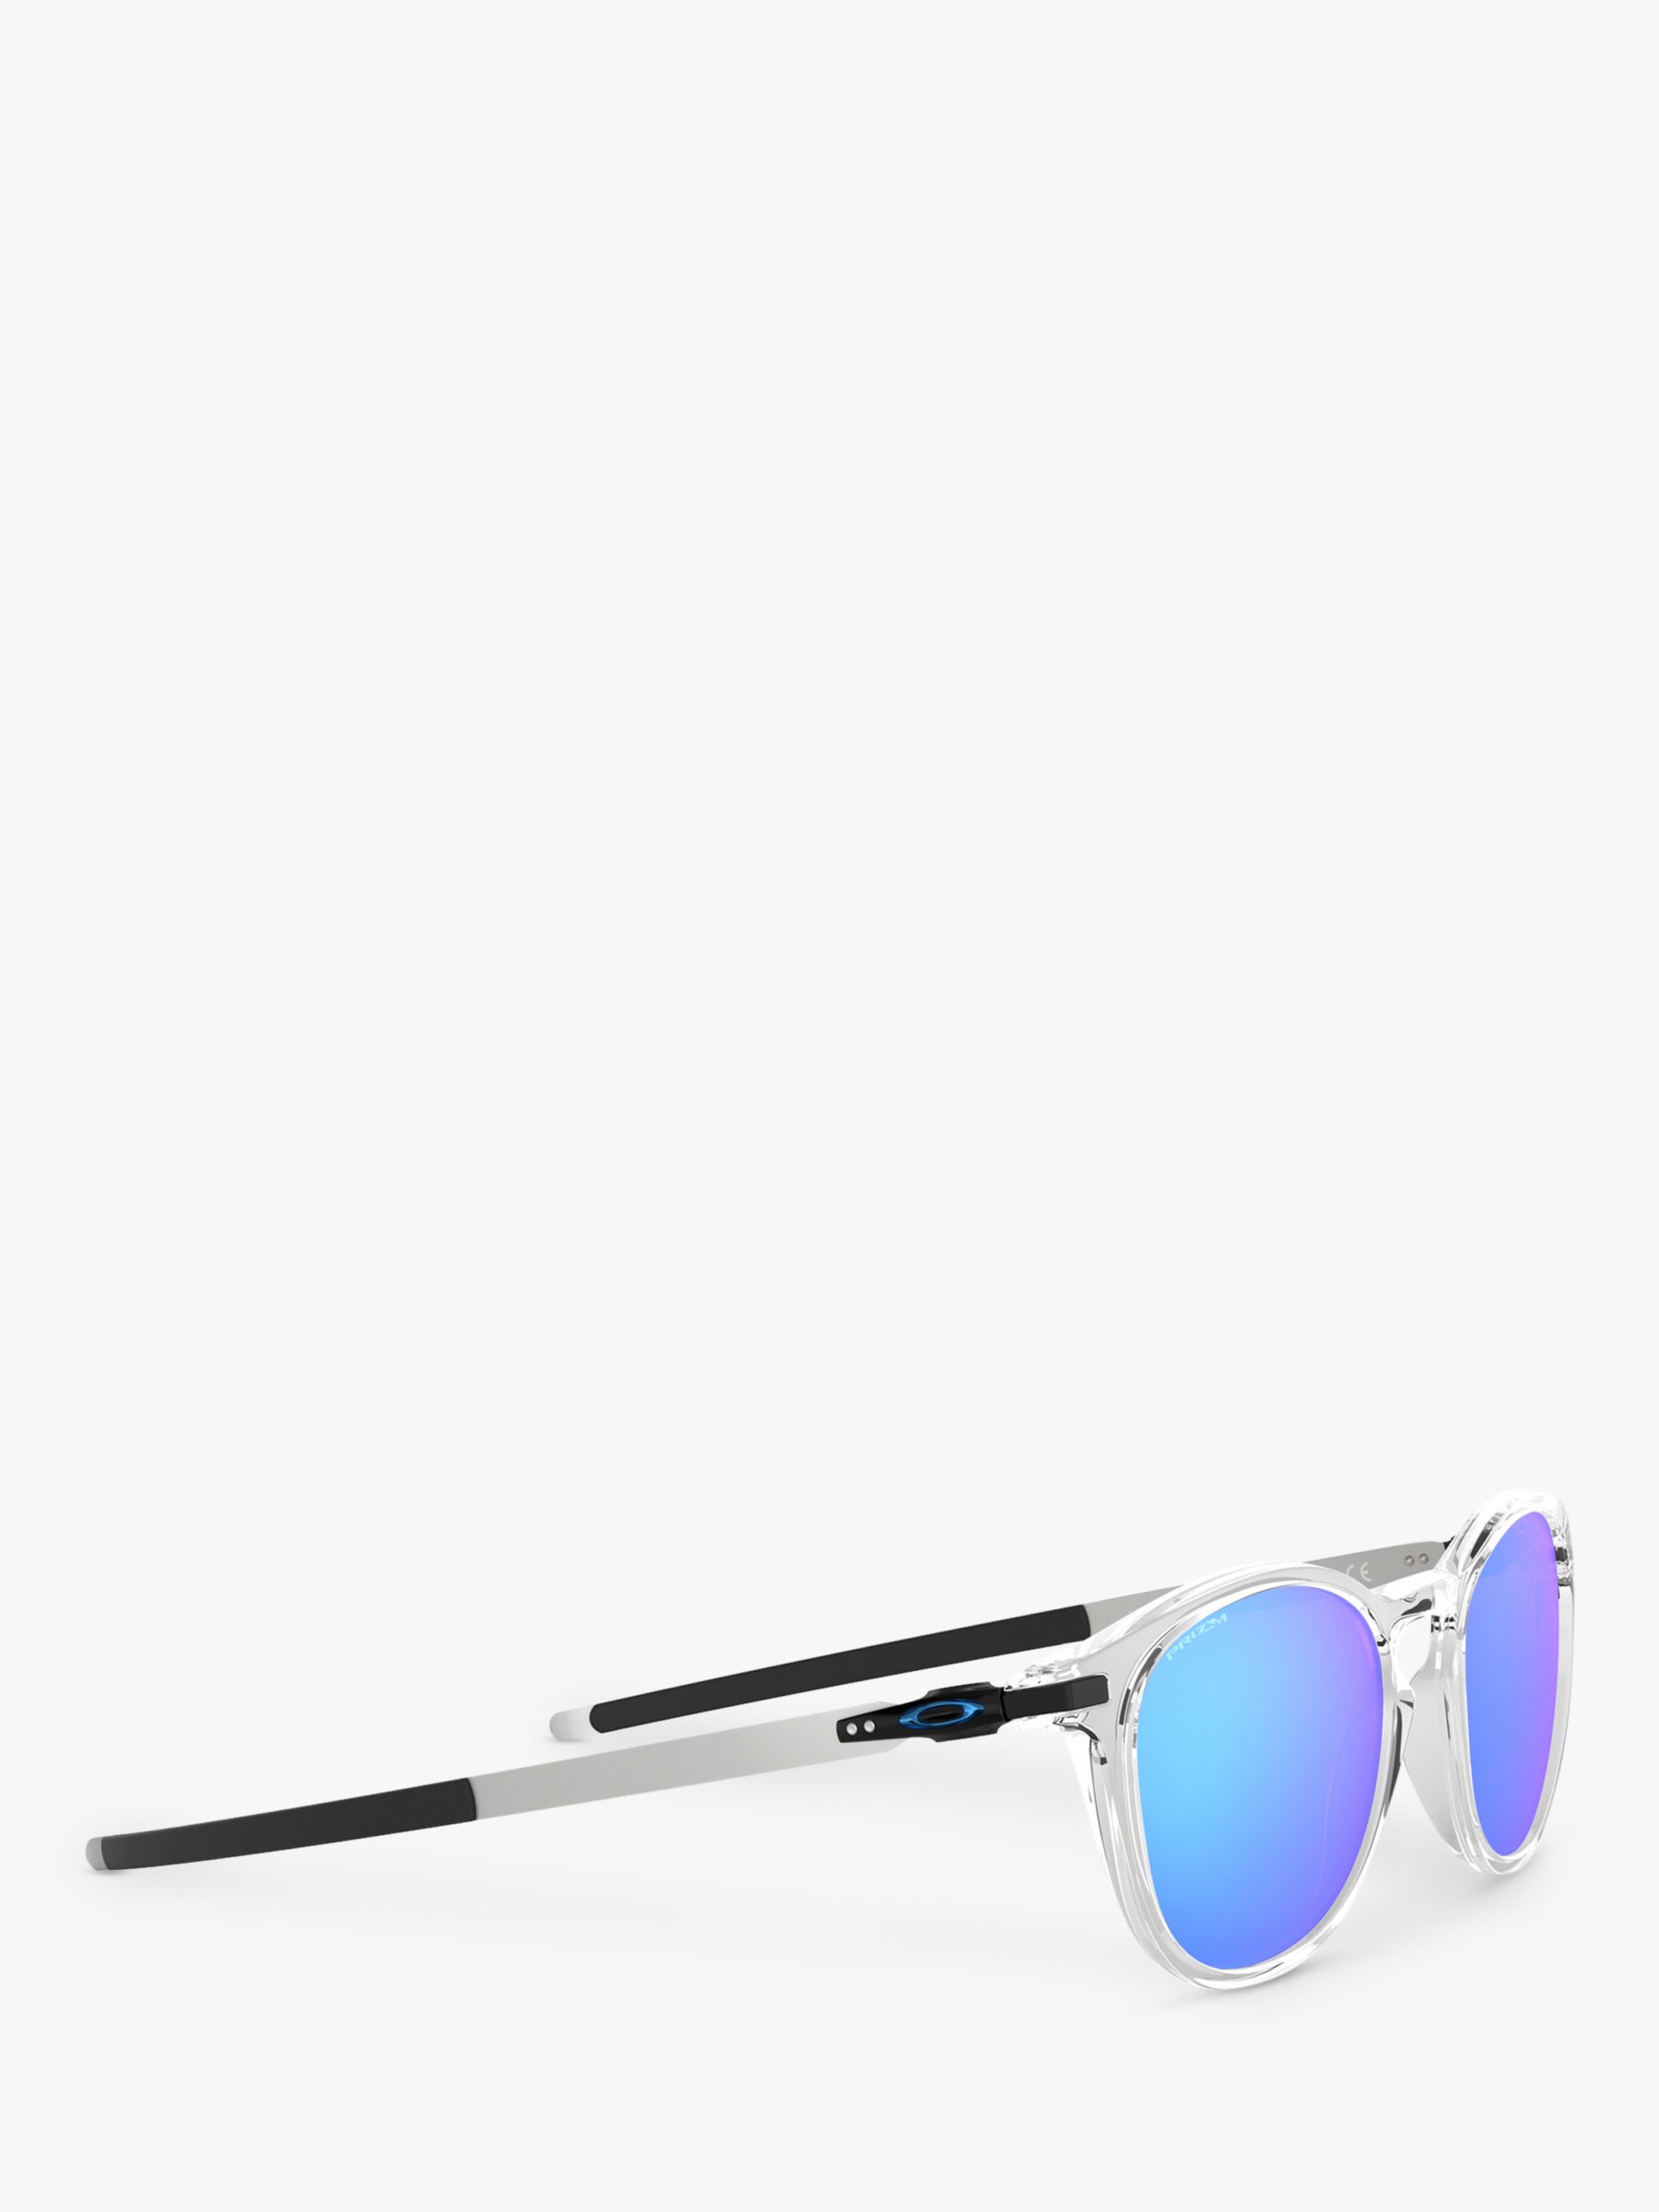 Oakley OO9439 Men's Pitchman R Prizm Round Sunglasses, Clear/Mirror Blue at John Lewis & Partners